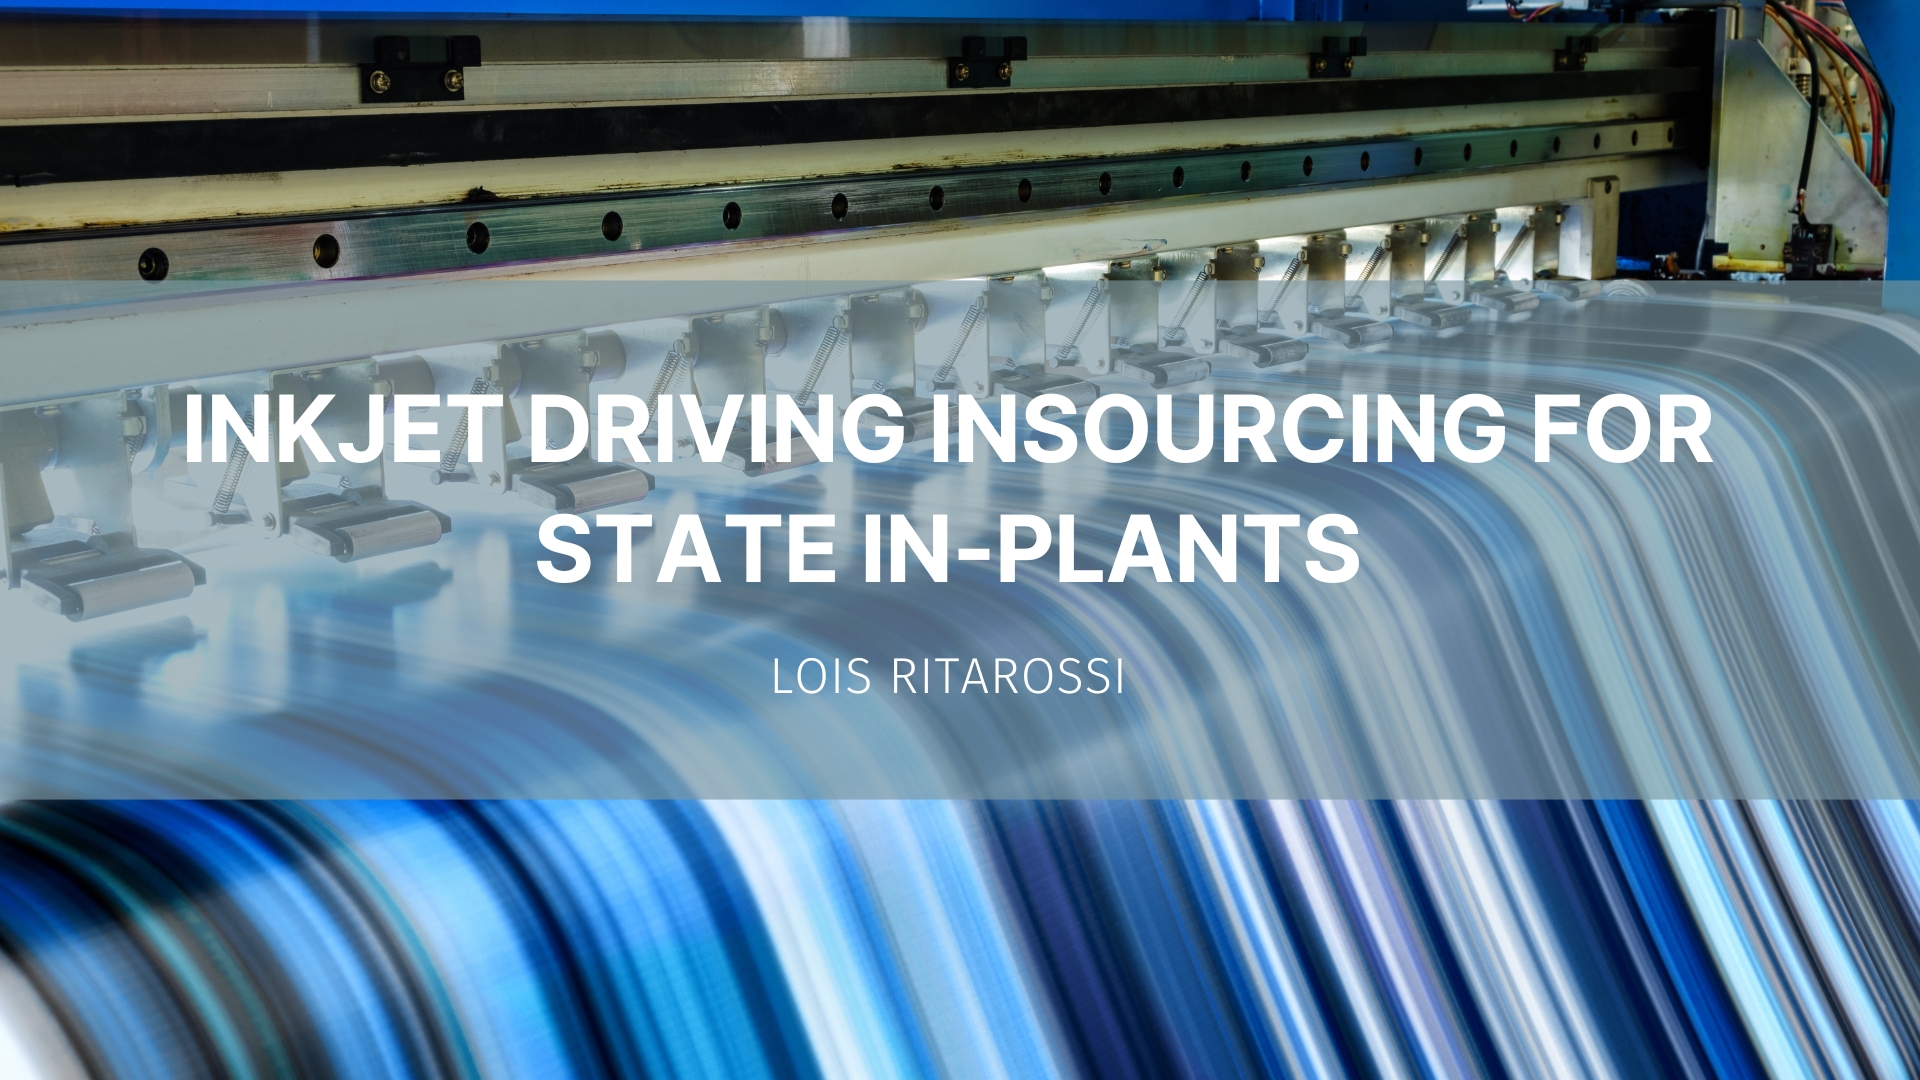 Featured image for “Inkjet driving insourcing for state in-plants”